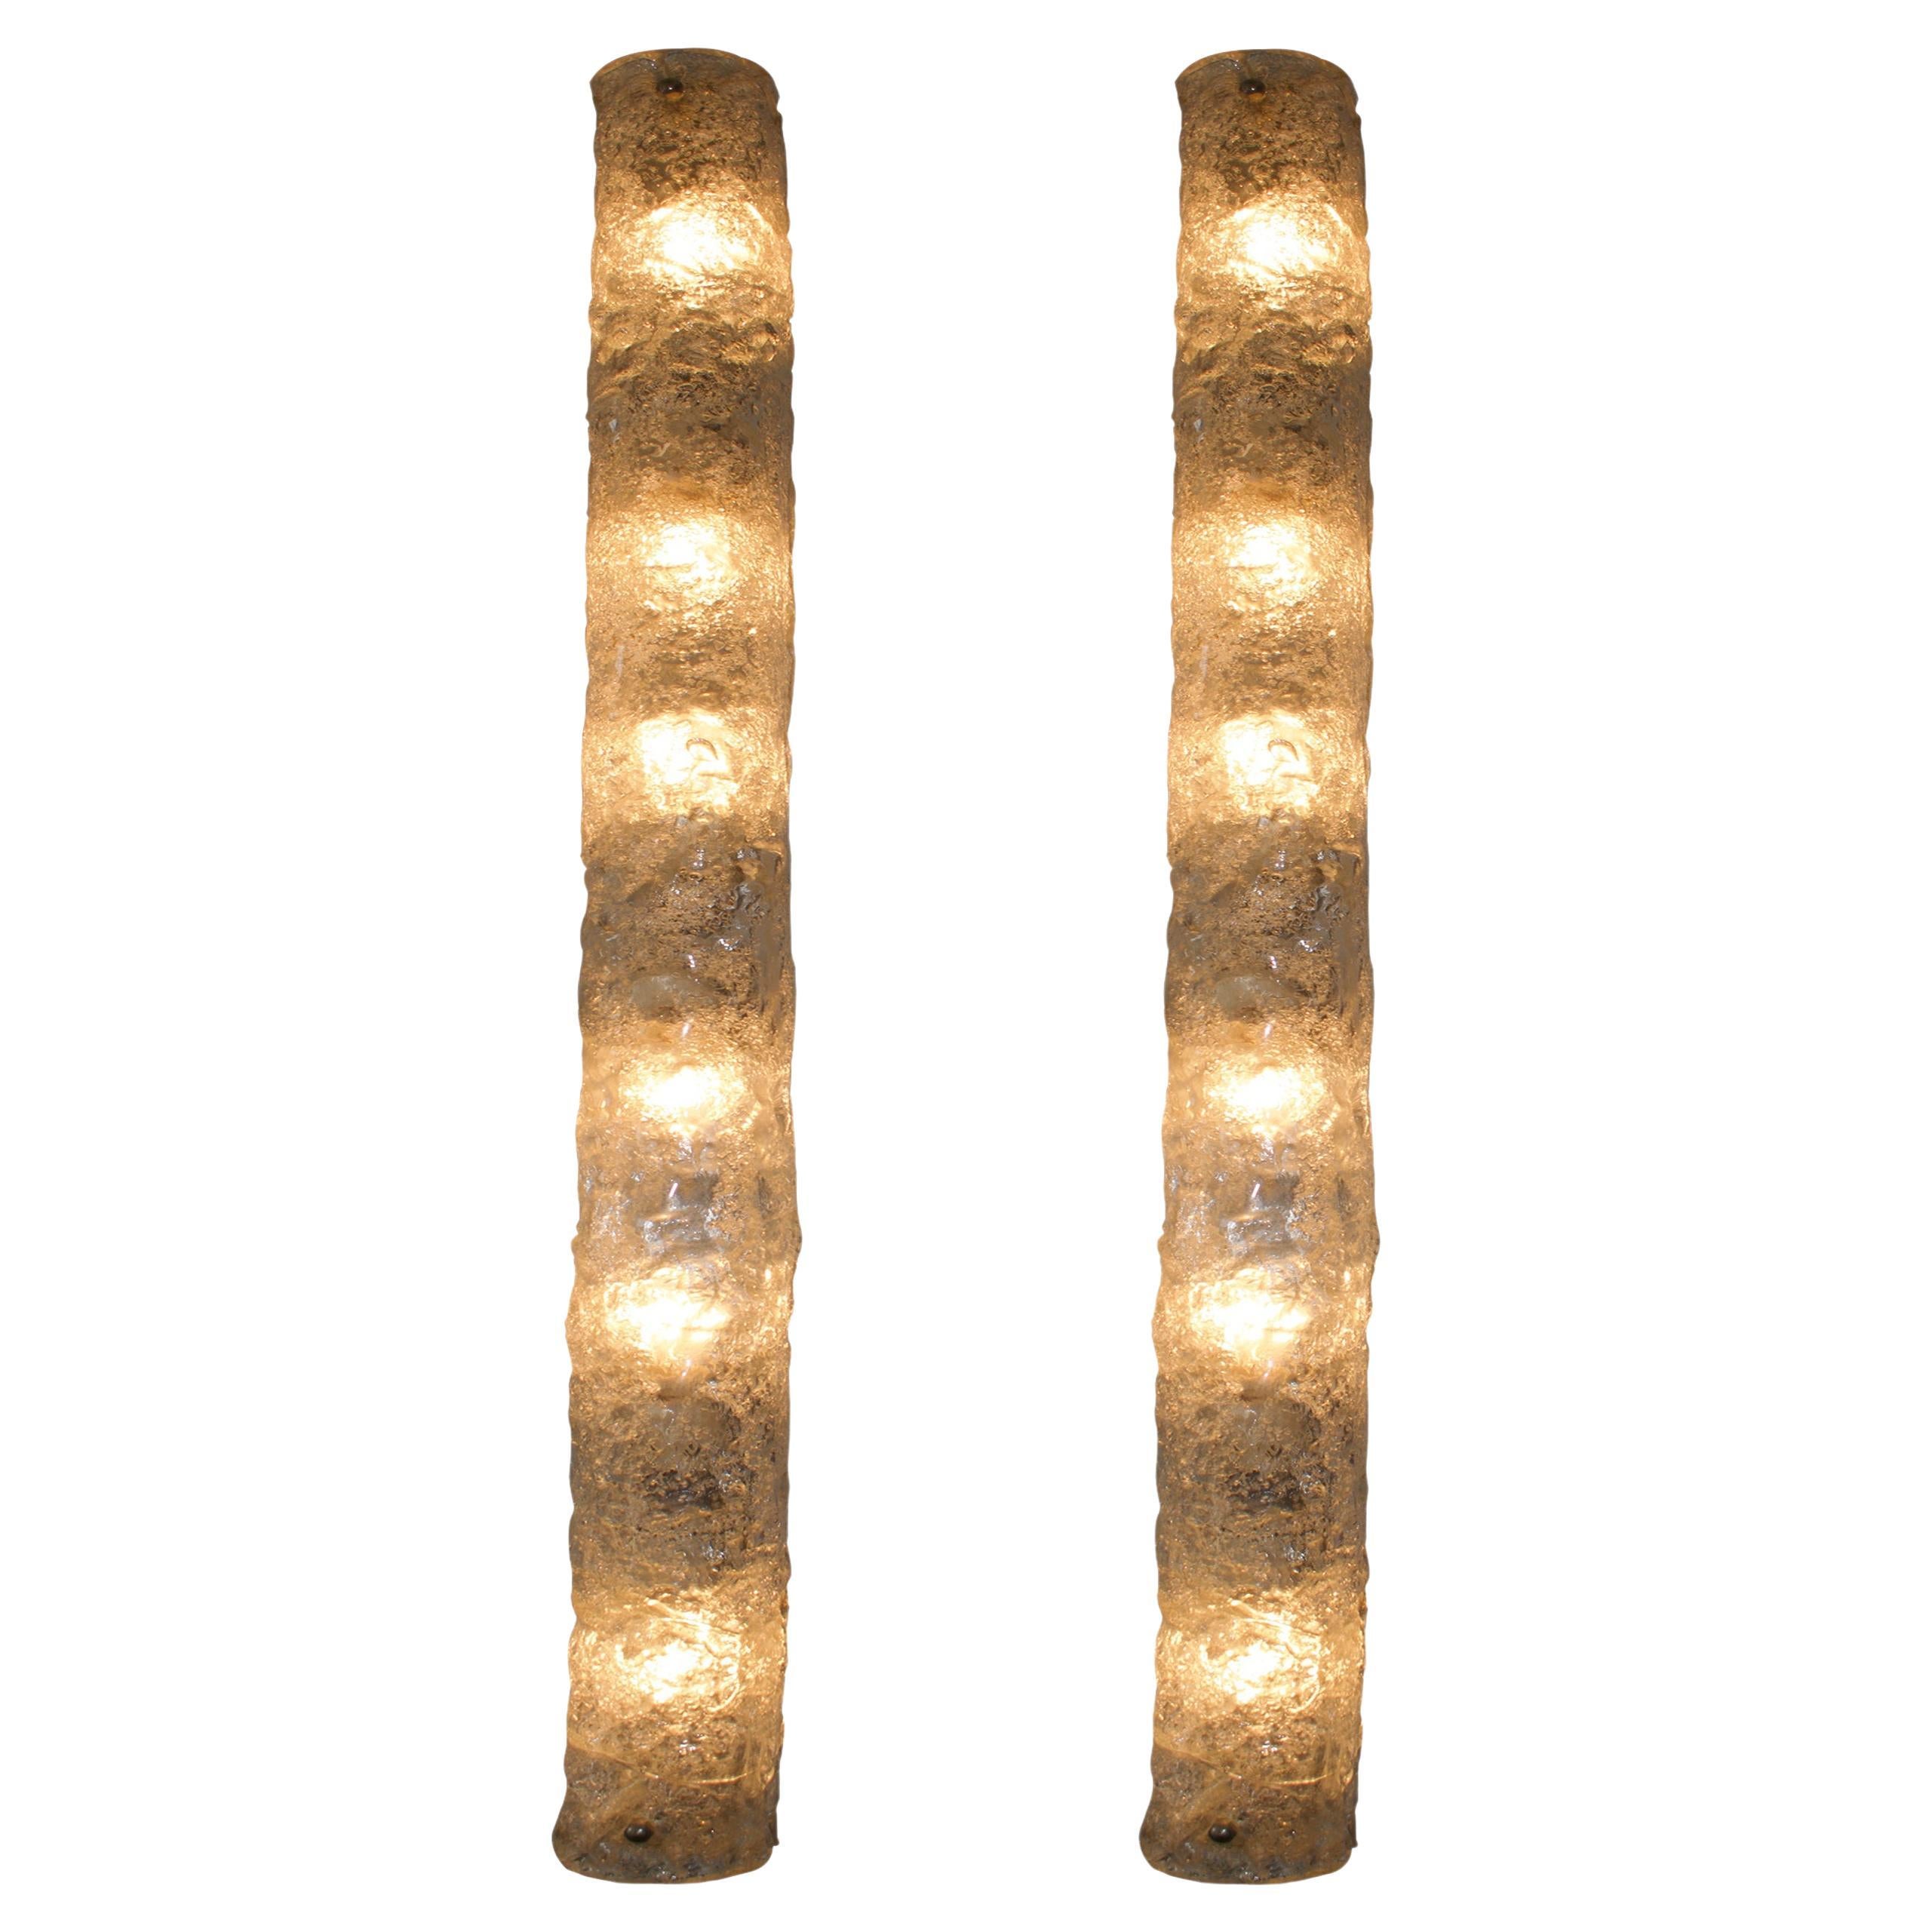 Pair of 1960s German Textured Frosted Glass Wall Lights by Hillebrand Leuchten